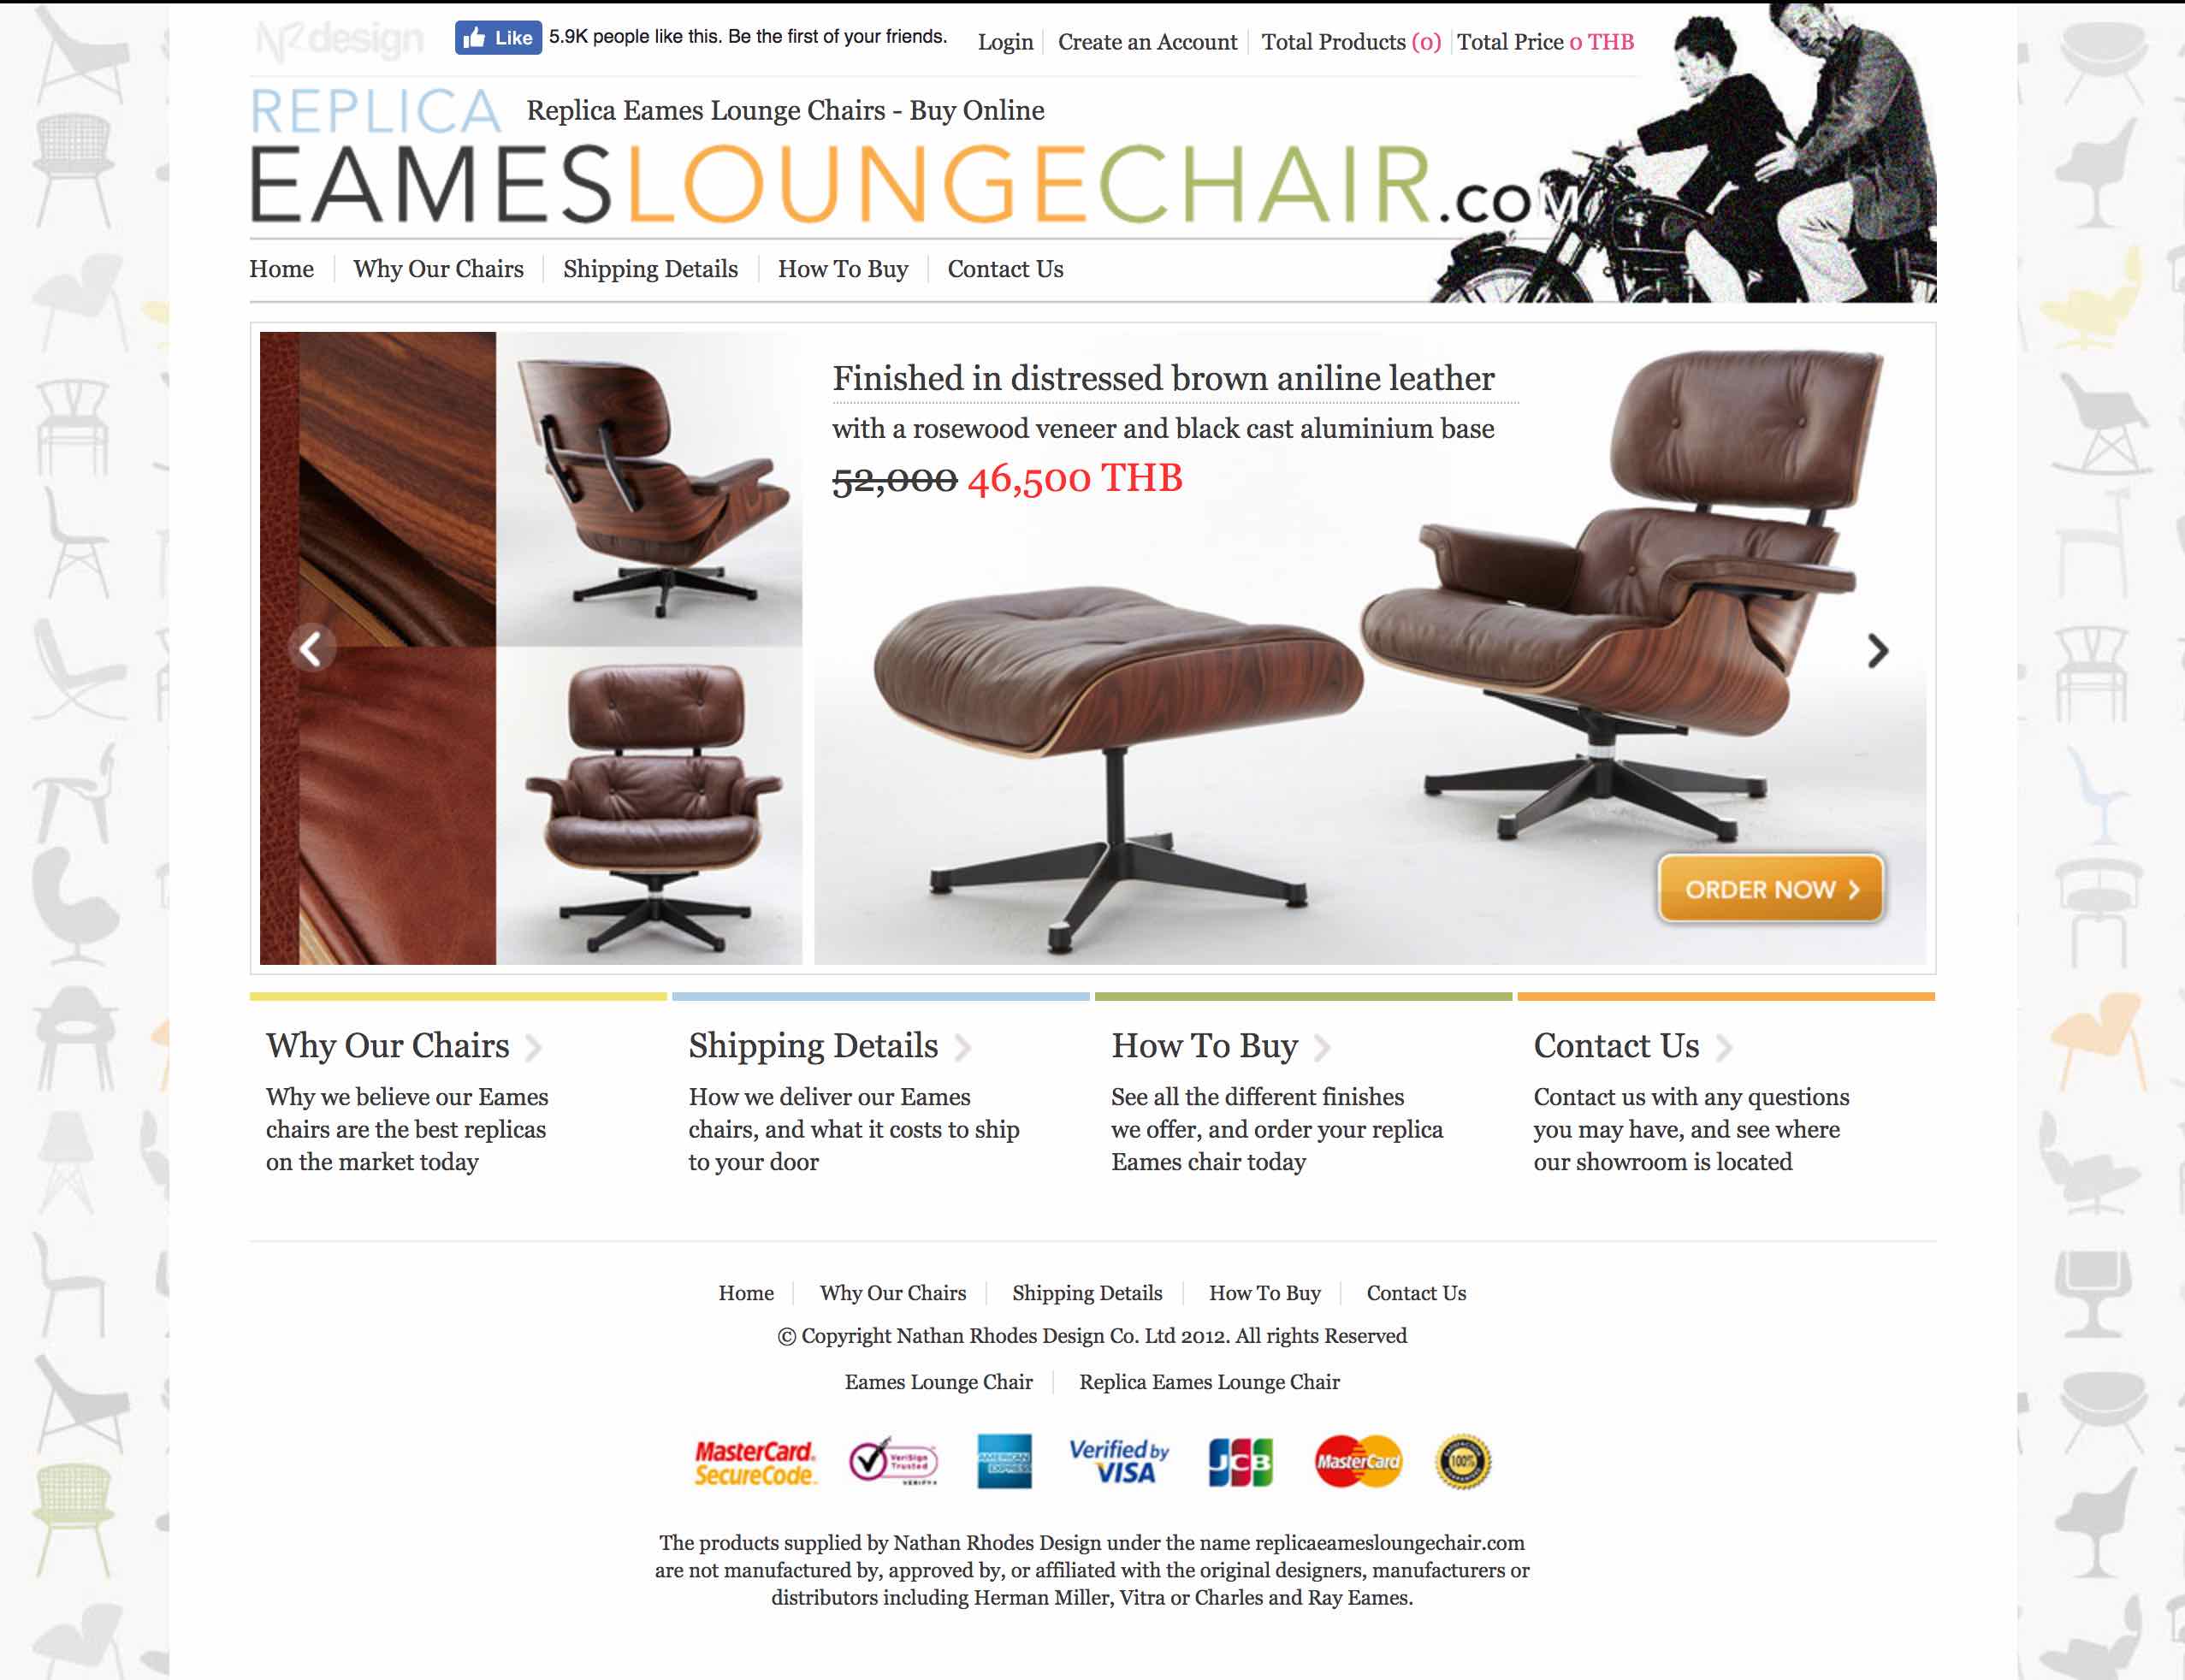 Eames Lounge Chair Image